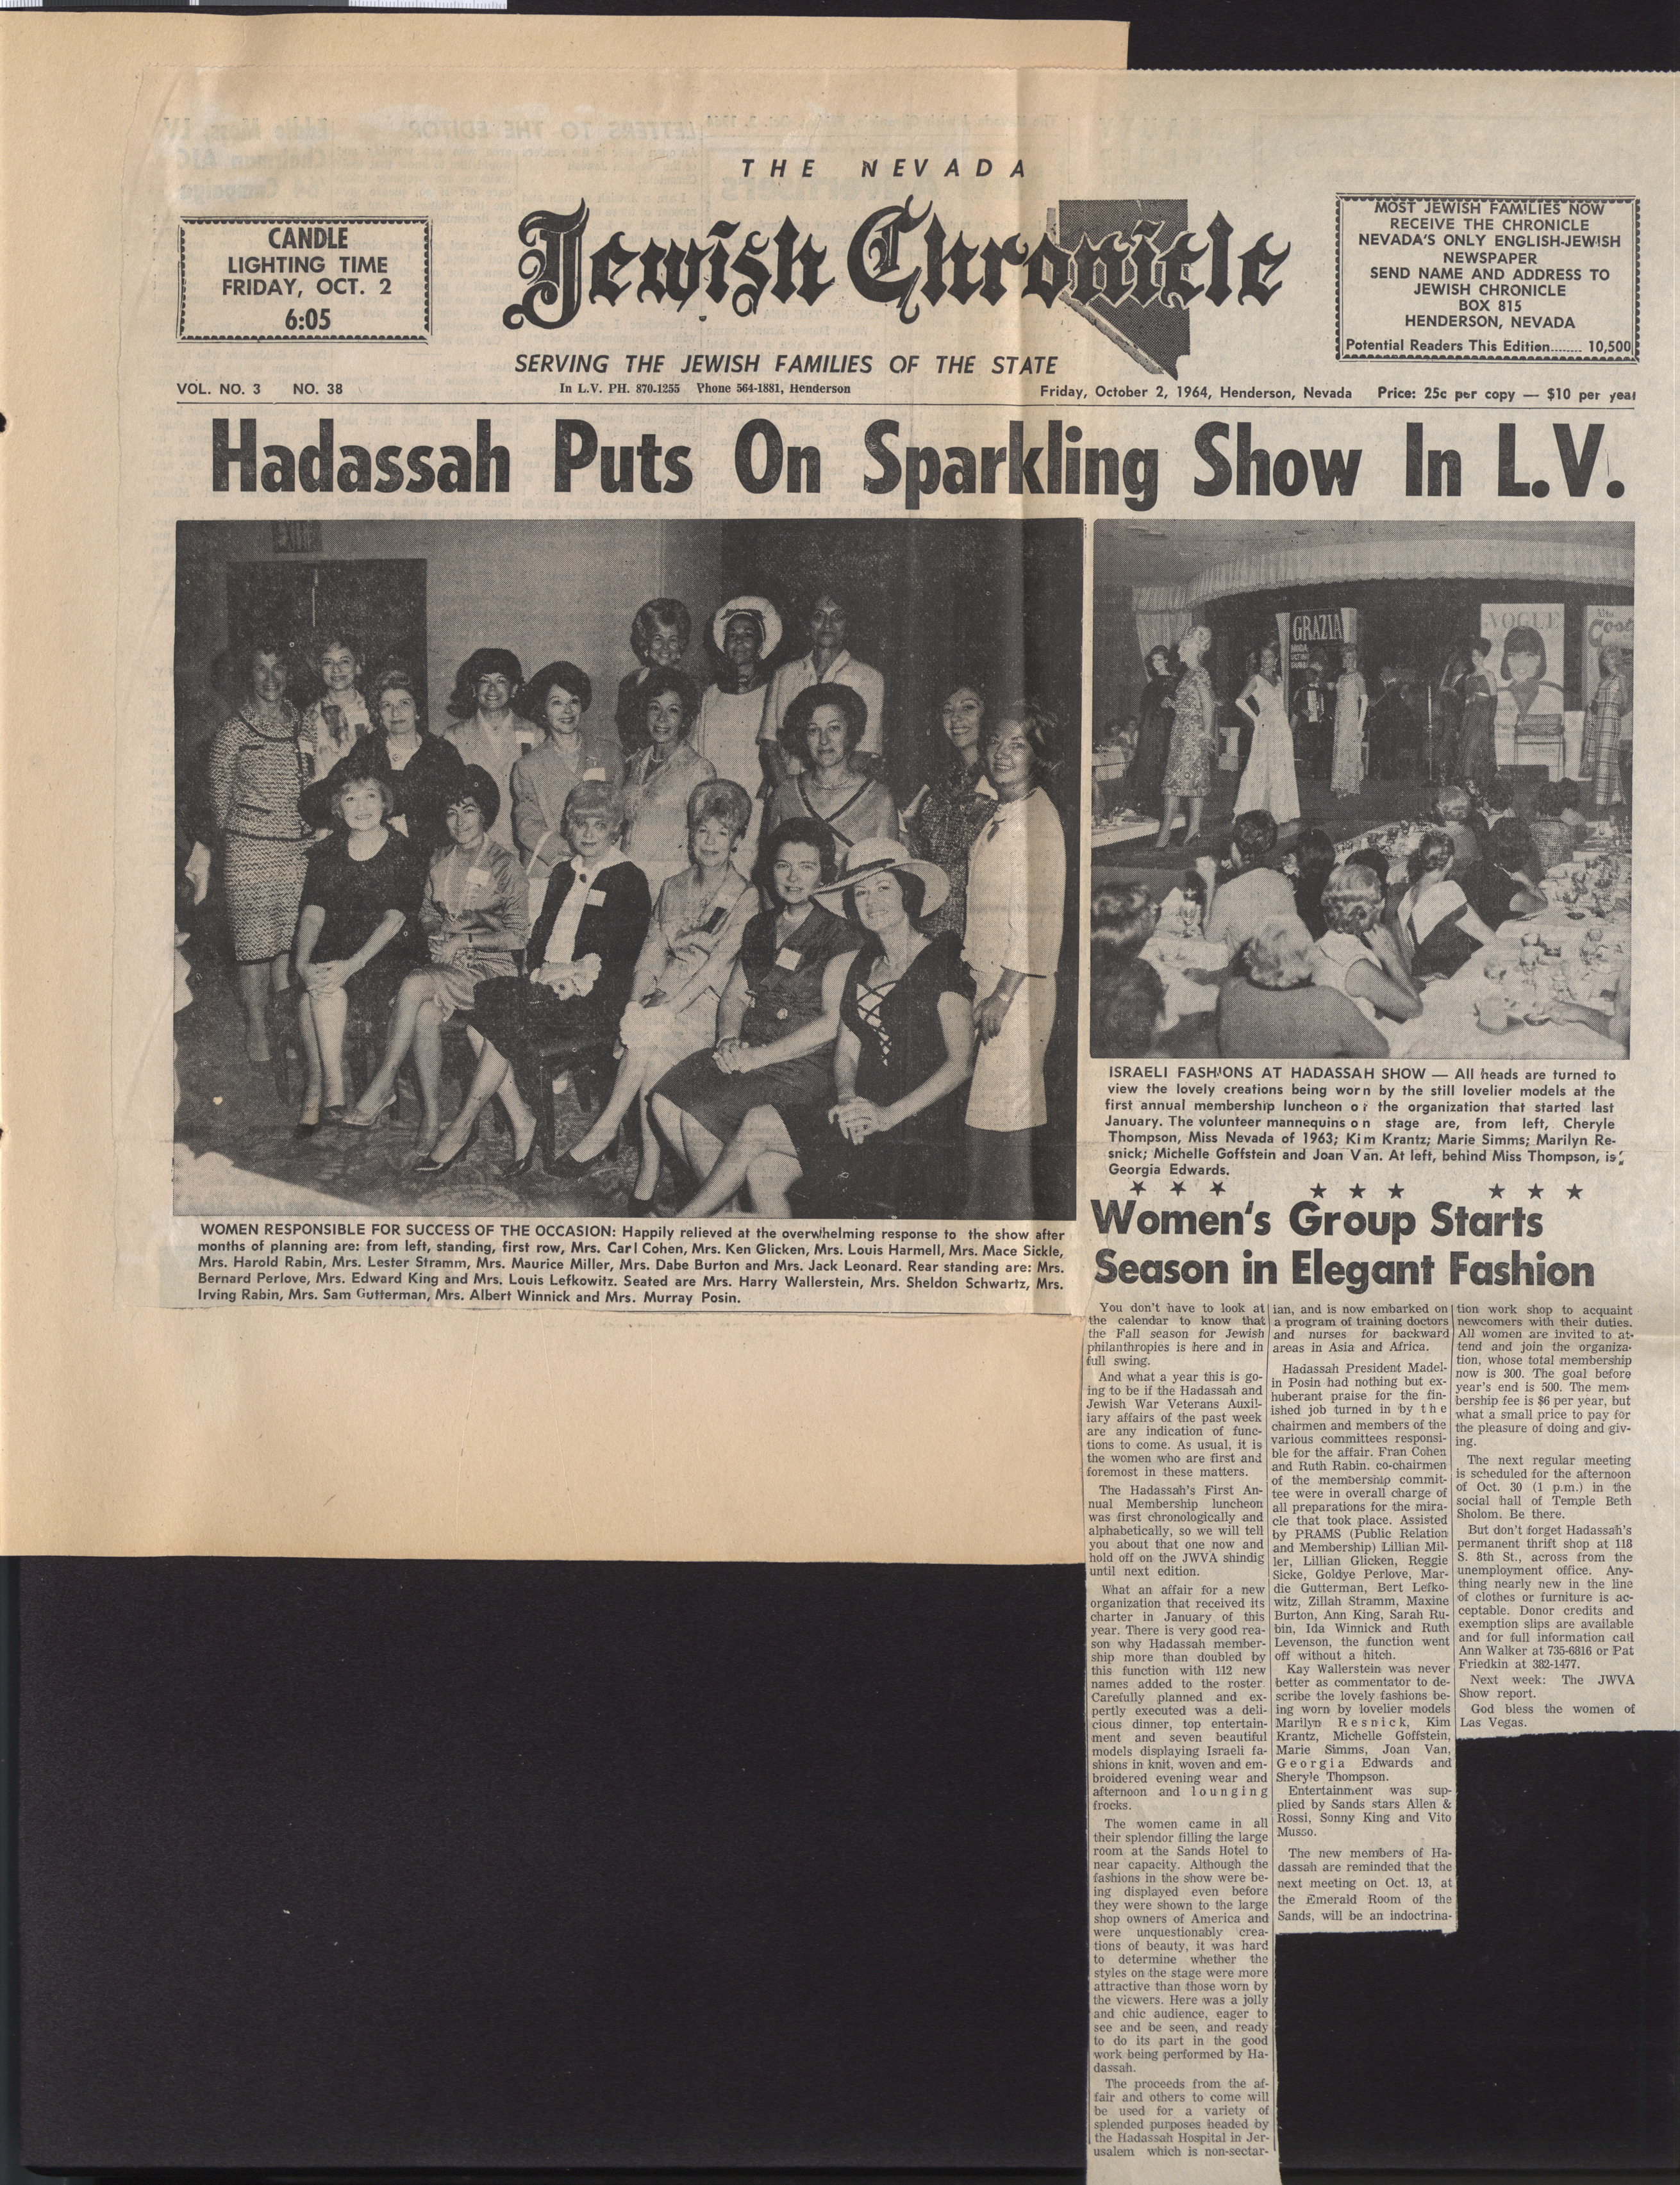 Newspaper clipping, Hadassah puts on sparkling show in L.V., The Nevada Jewish Chronicle, October 2, 1964